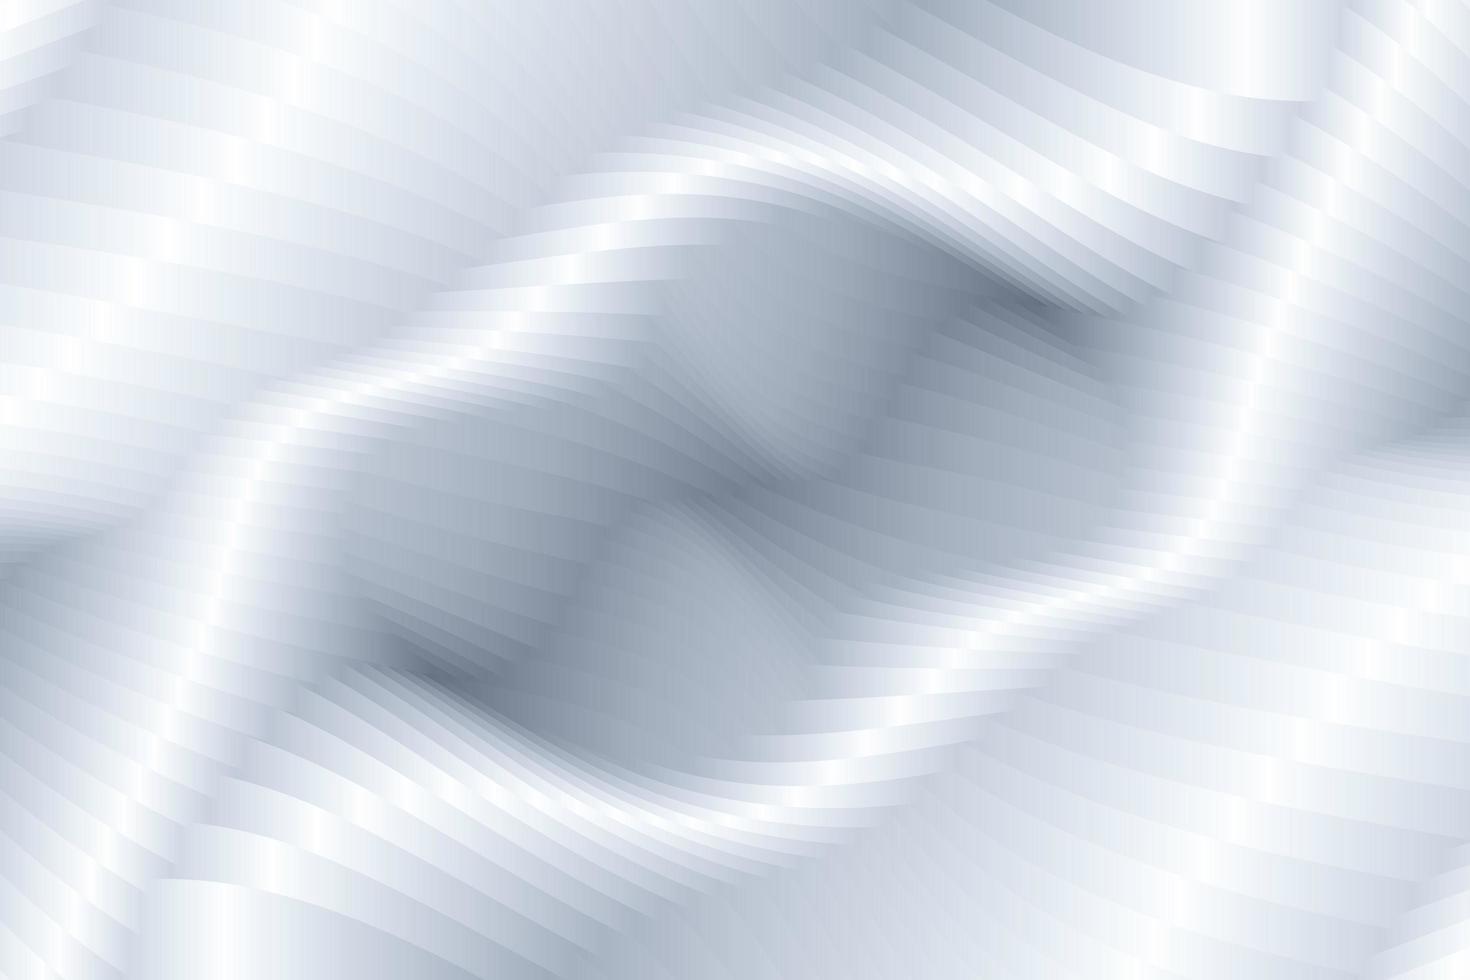 Abstract white background with wavy pattern. White wavy lines texture texture background, 3d rendering, 3d illustration. photo